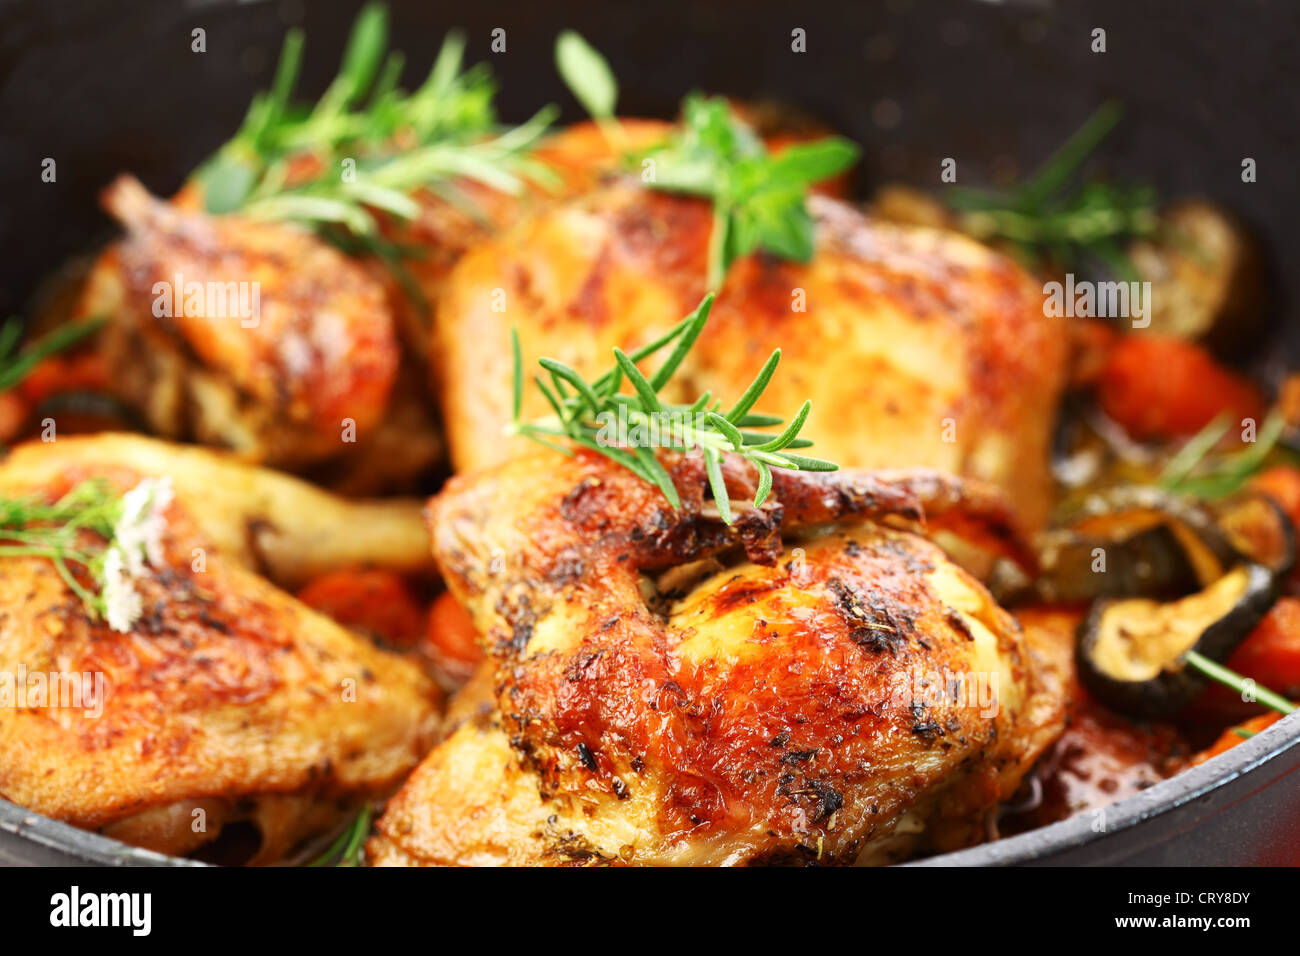 Tasty grilled chicken with vegetable and herbs Stock Photo